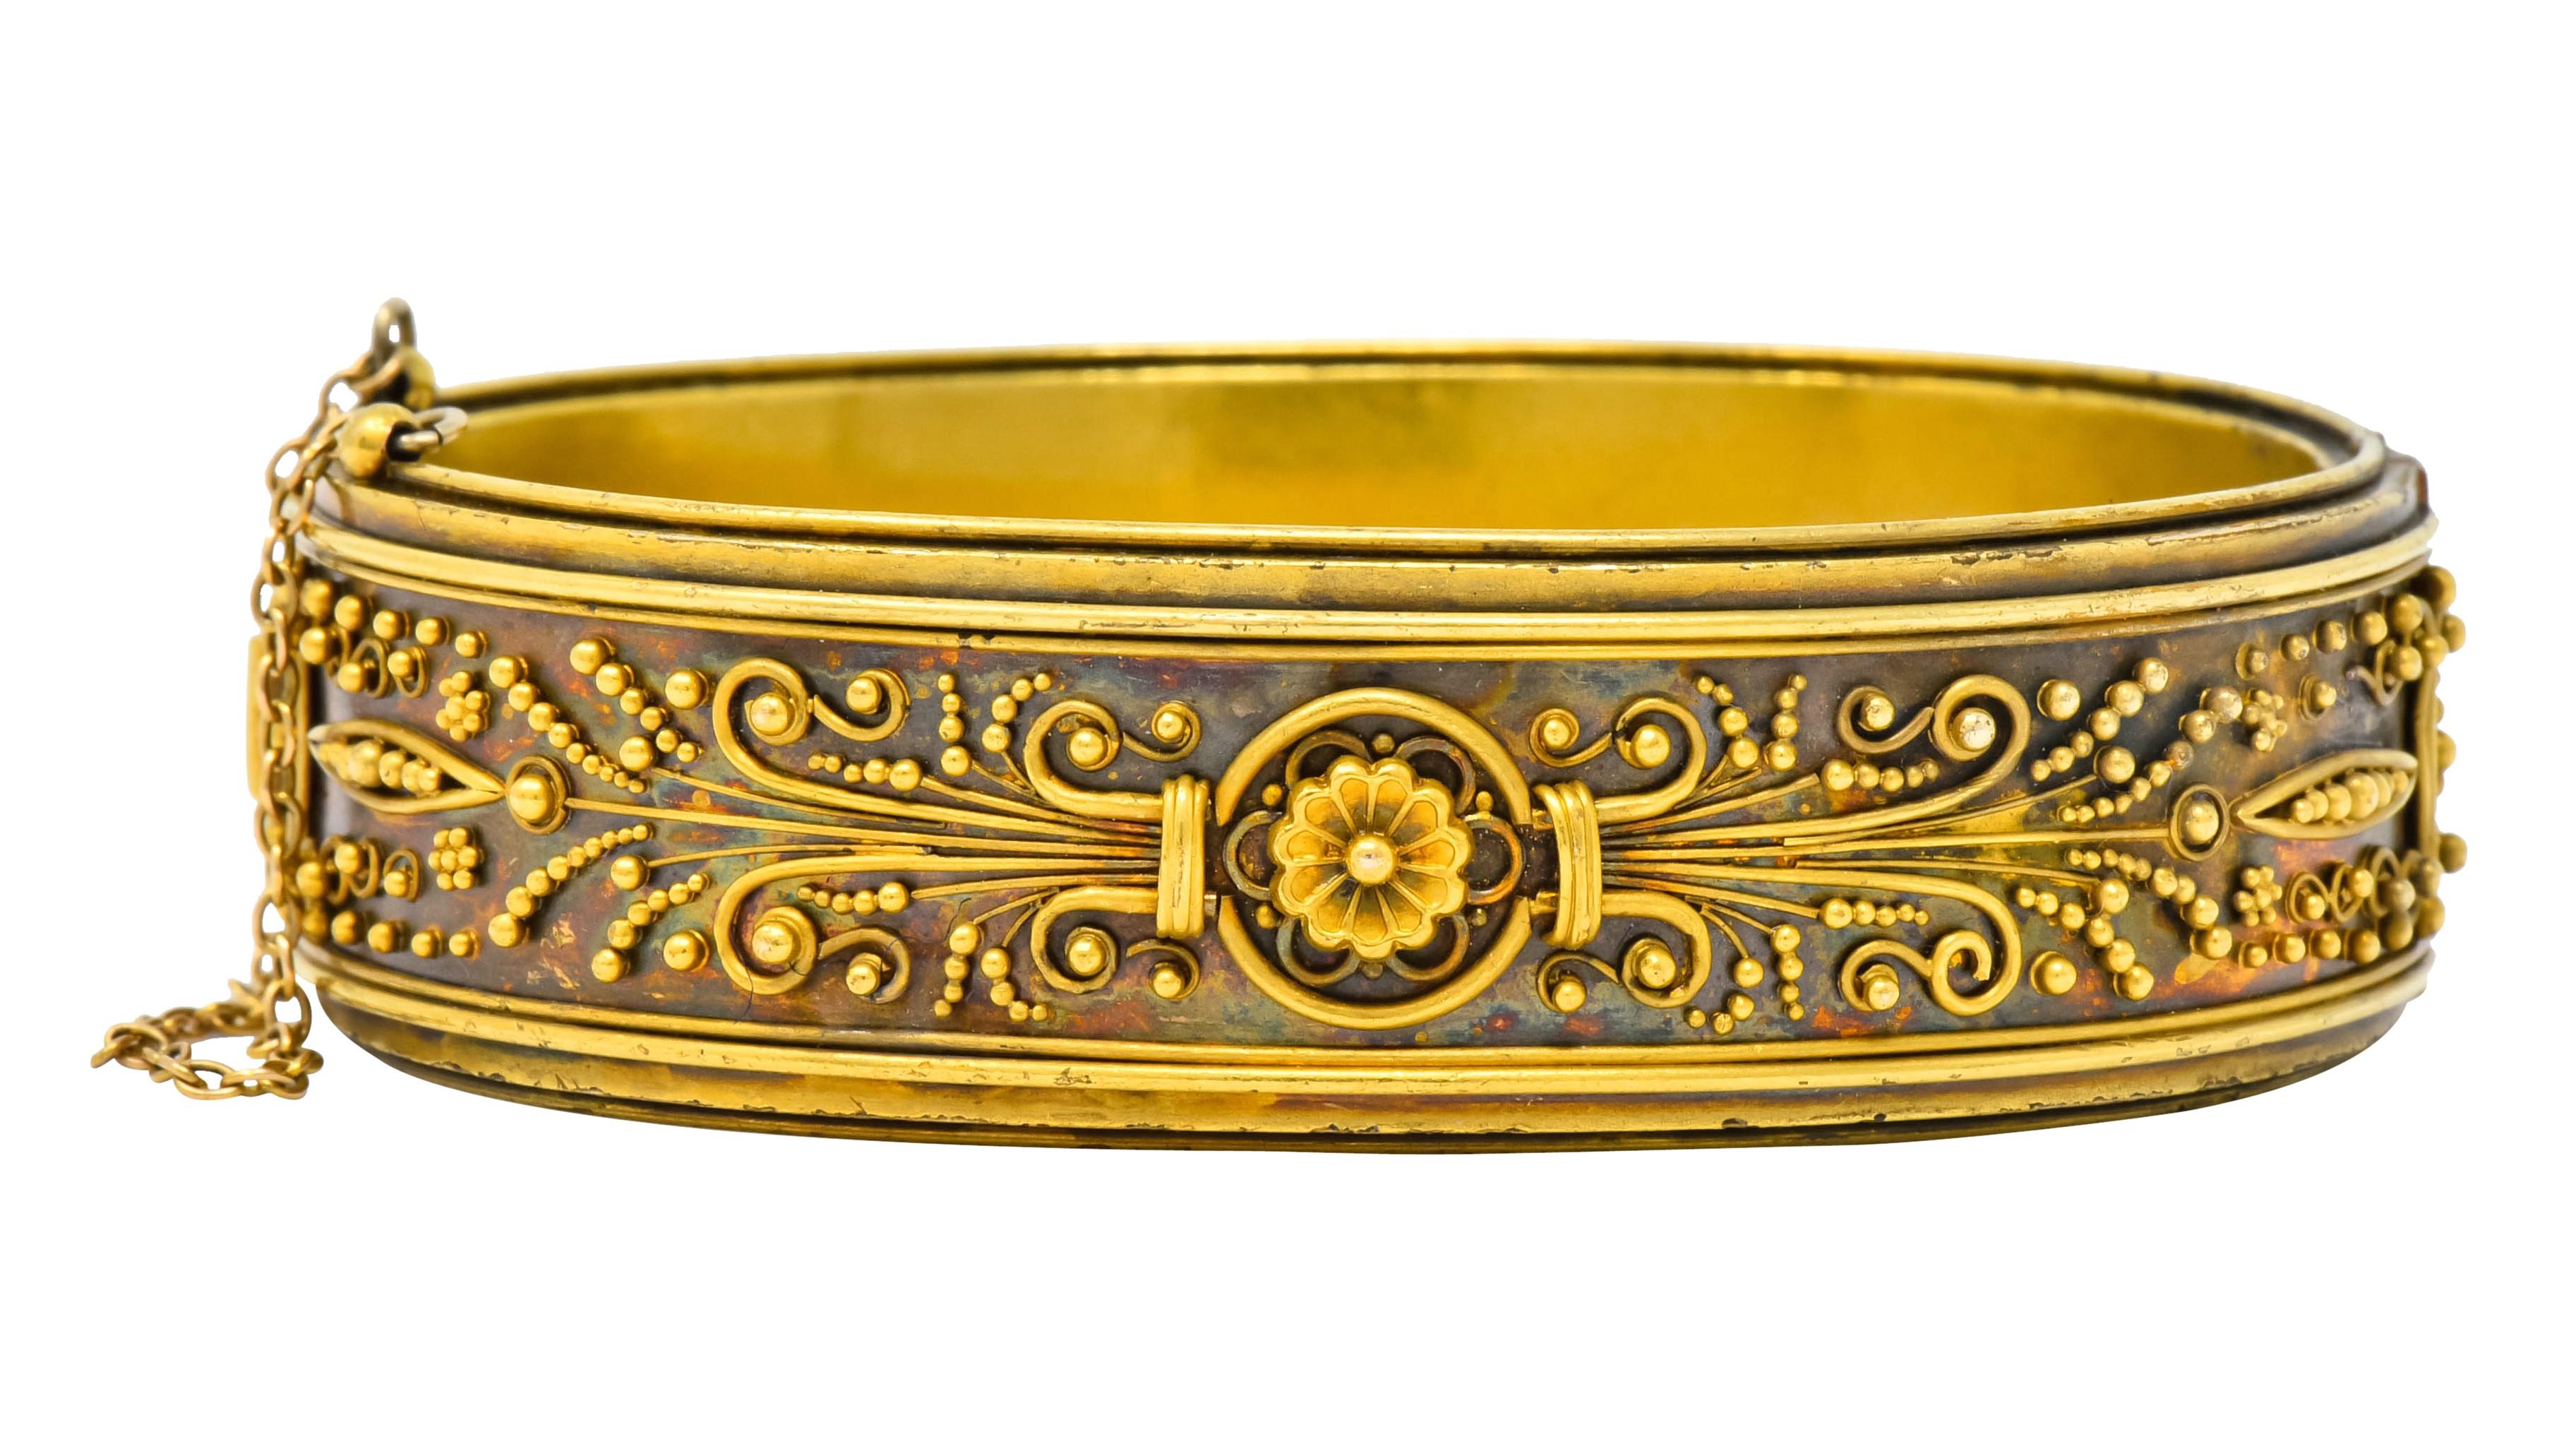 Bangle style bracelet centering a scalloped flower on each side flanked by stylized wheat motif

With deeply grooved edges and gold bead detail throughout

Hinged with concealed clasp and safety chain

With dated inscription

Tested as 18 karat